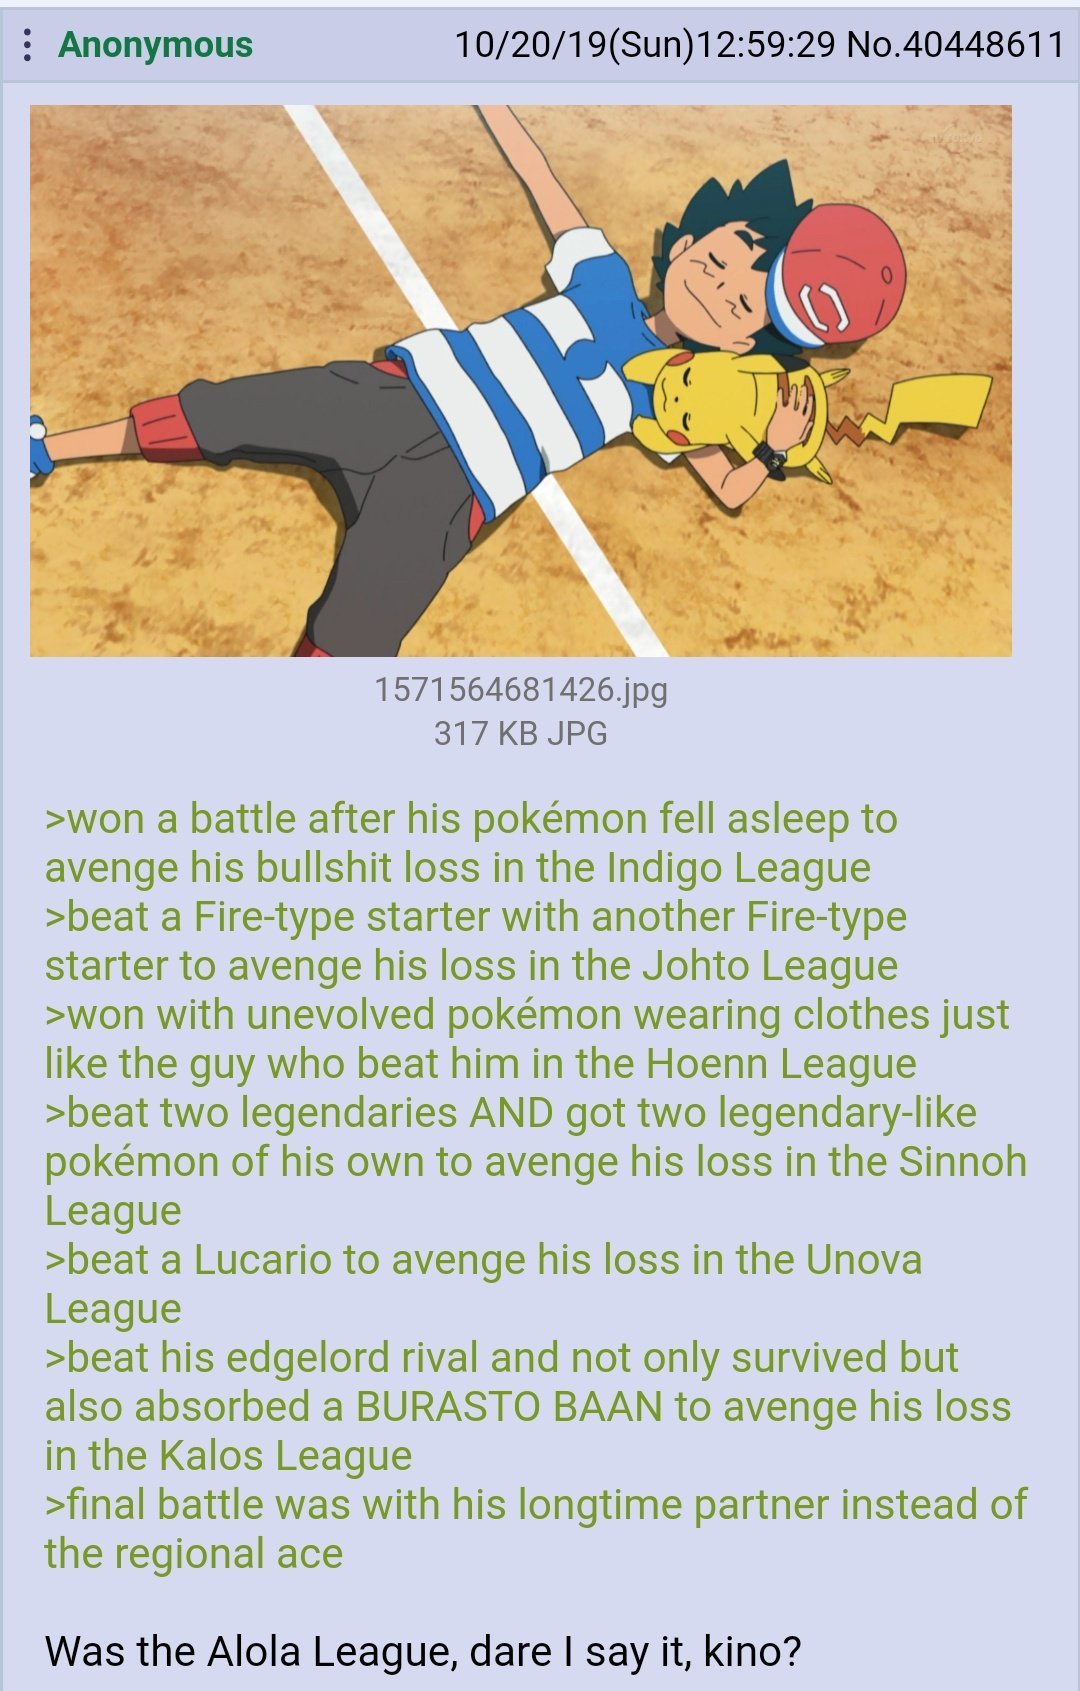 won a battle after his pokémon fell asleep to avenge his bullshit loss in the Indigo League
beat a Fire-type starter with another Fire-type starter to avenge his loss in the Johto League
won with unevolved pokémon wearing clothes just like the guy who beat him in the Hoenn League
beat two legendaries AND got two legendary-like pokémon of his own to avenge his loss in the Sinnoh League
beat a Lucario to avenge his loss in the Unova League
beat his edgelord rival and not only survived but also absorbed a BURASTO BAAN to avenge his loss in the Kalos League
final battle was with his longtime partner instead of the regional ace

Was the Alola League, dare I say it, kino?